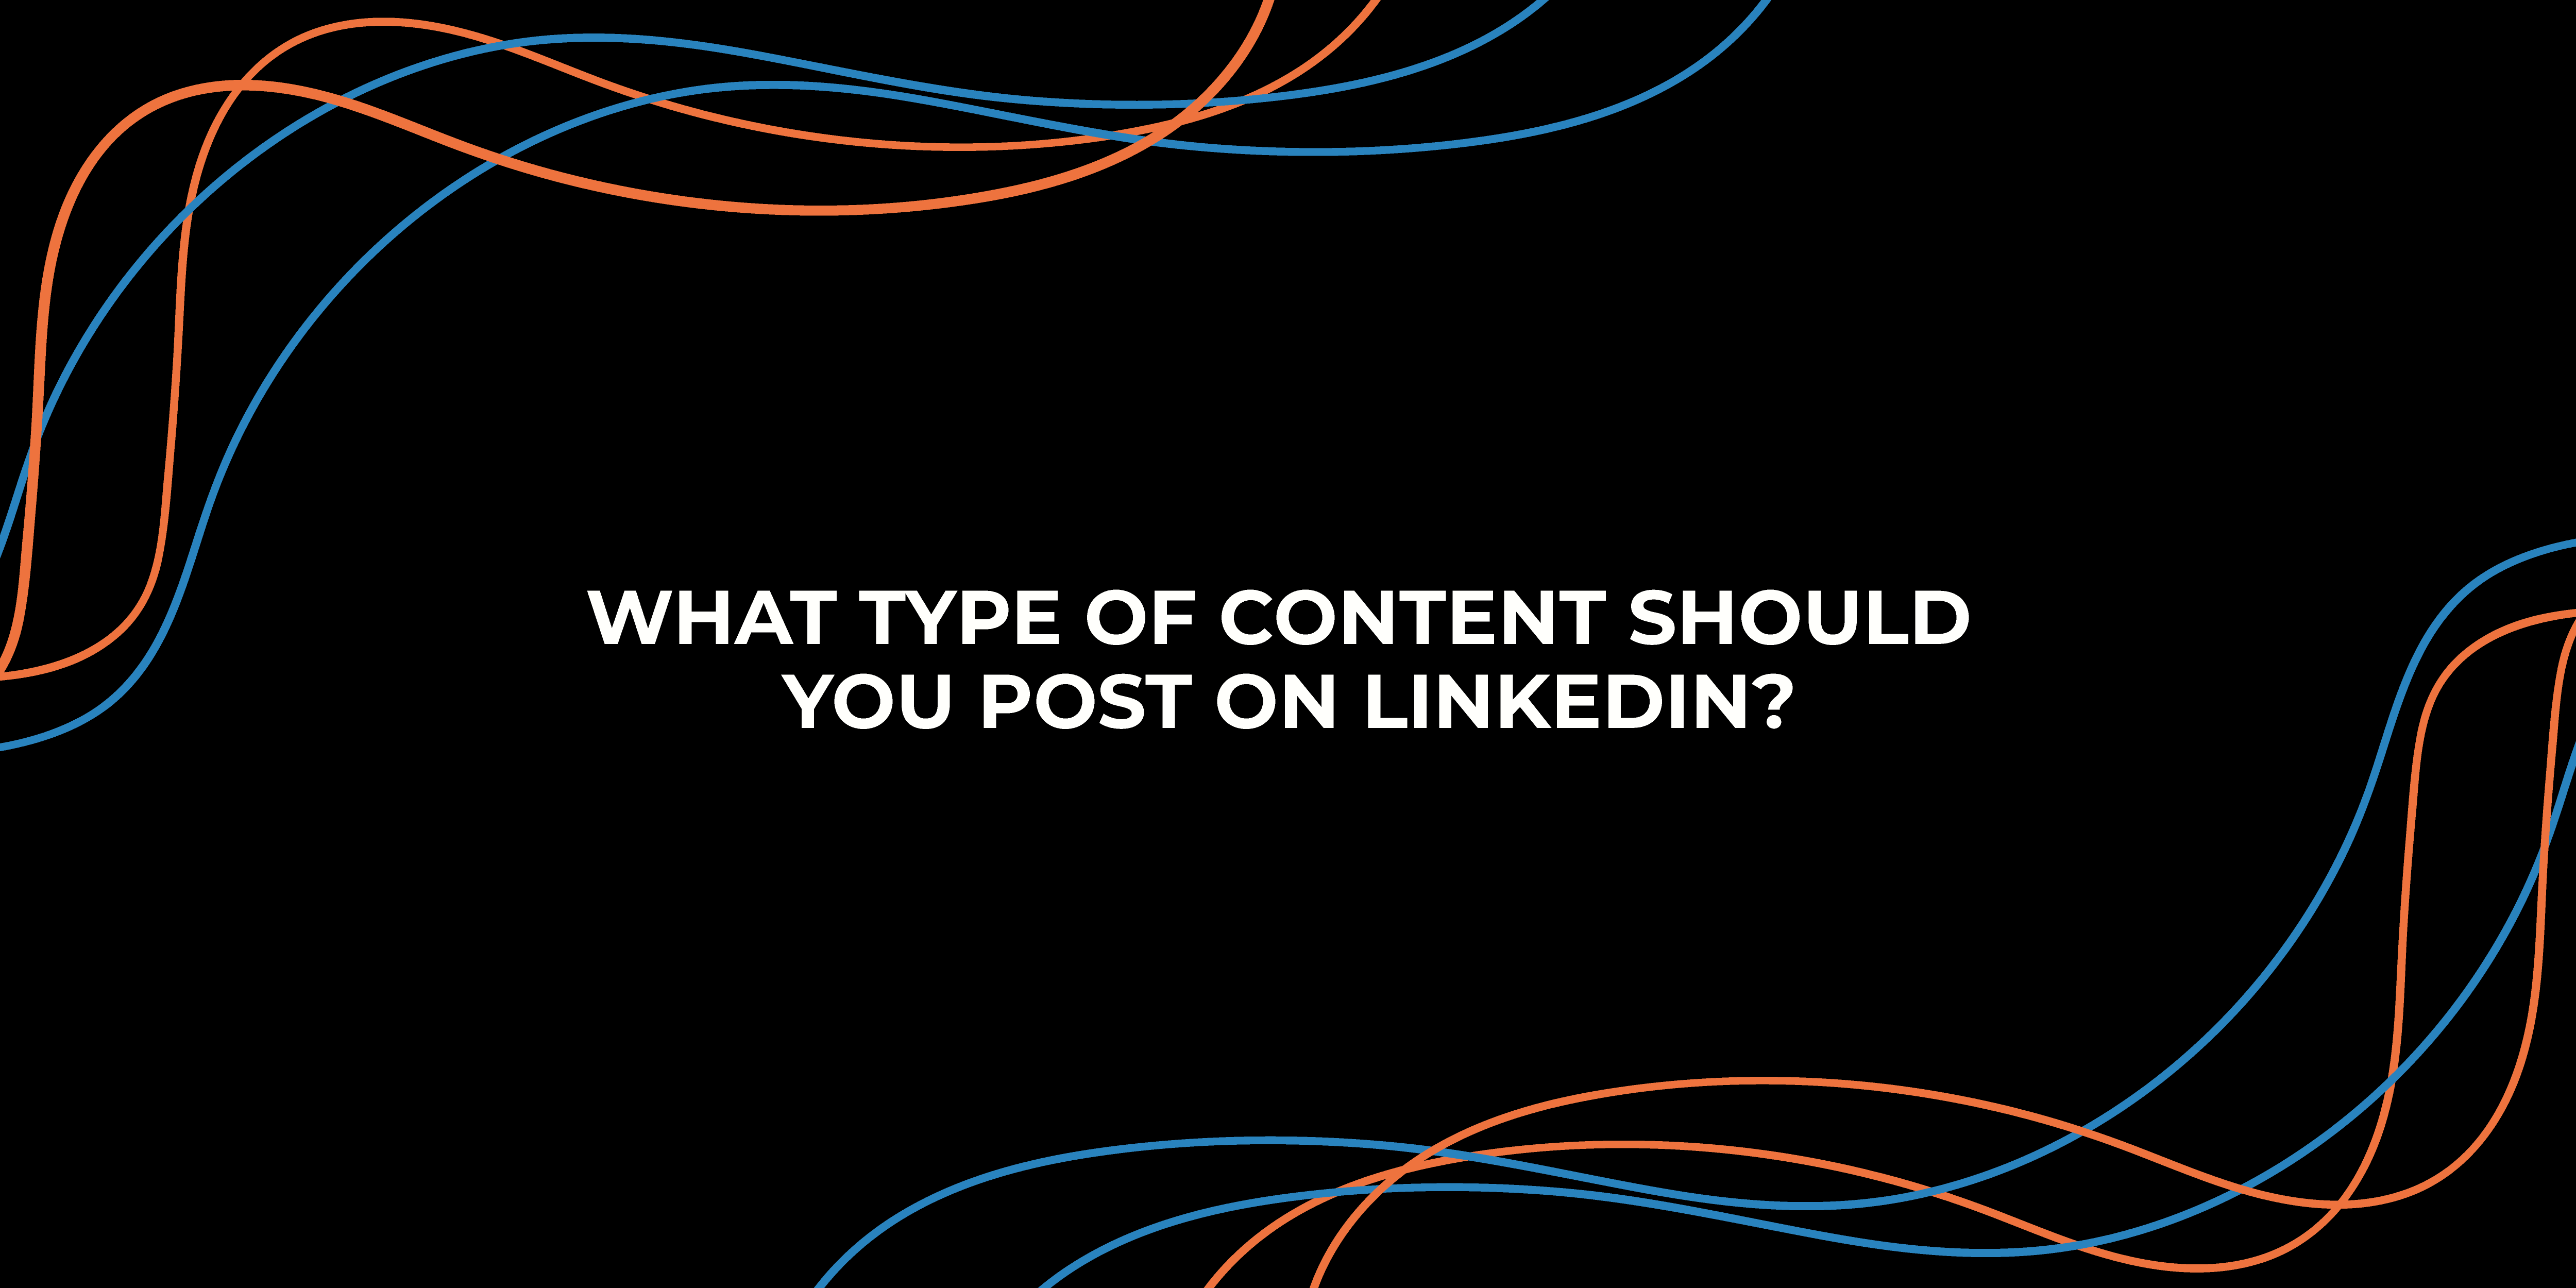 What Type of Content Should You Post on LinkedIn?